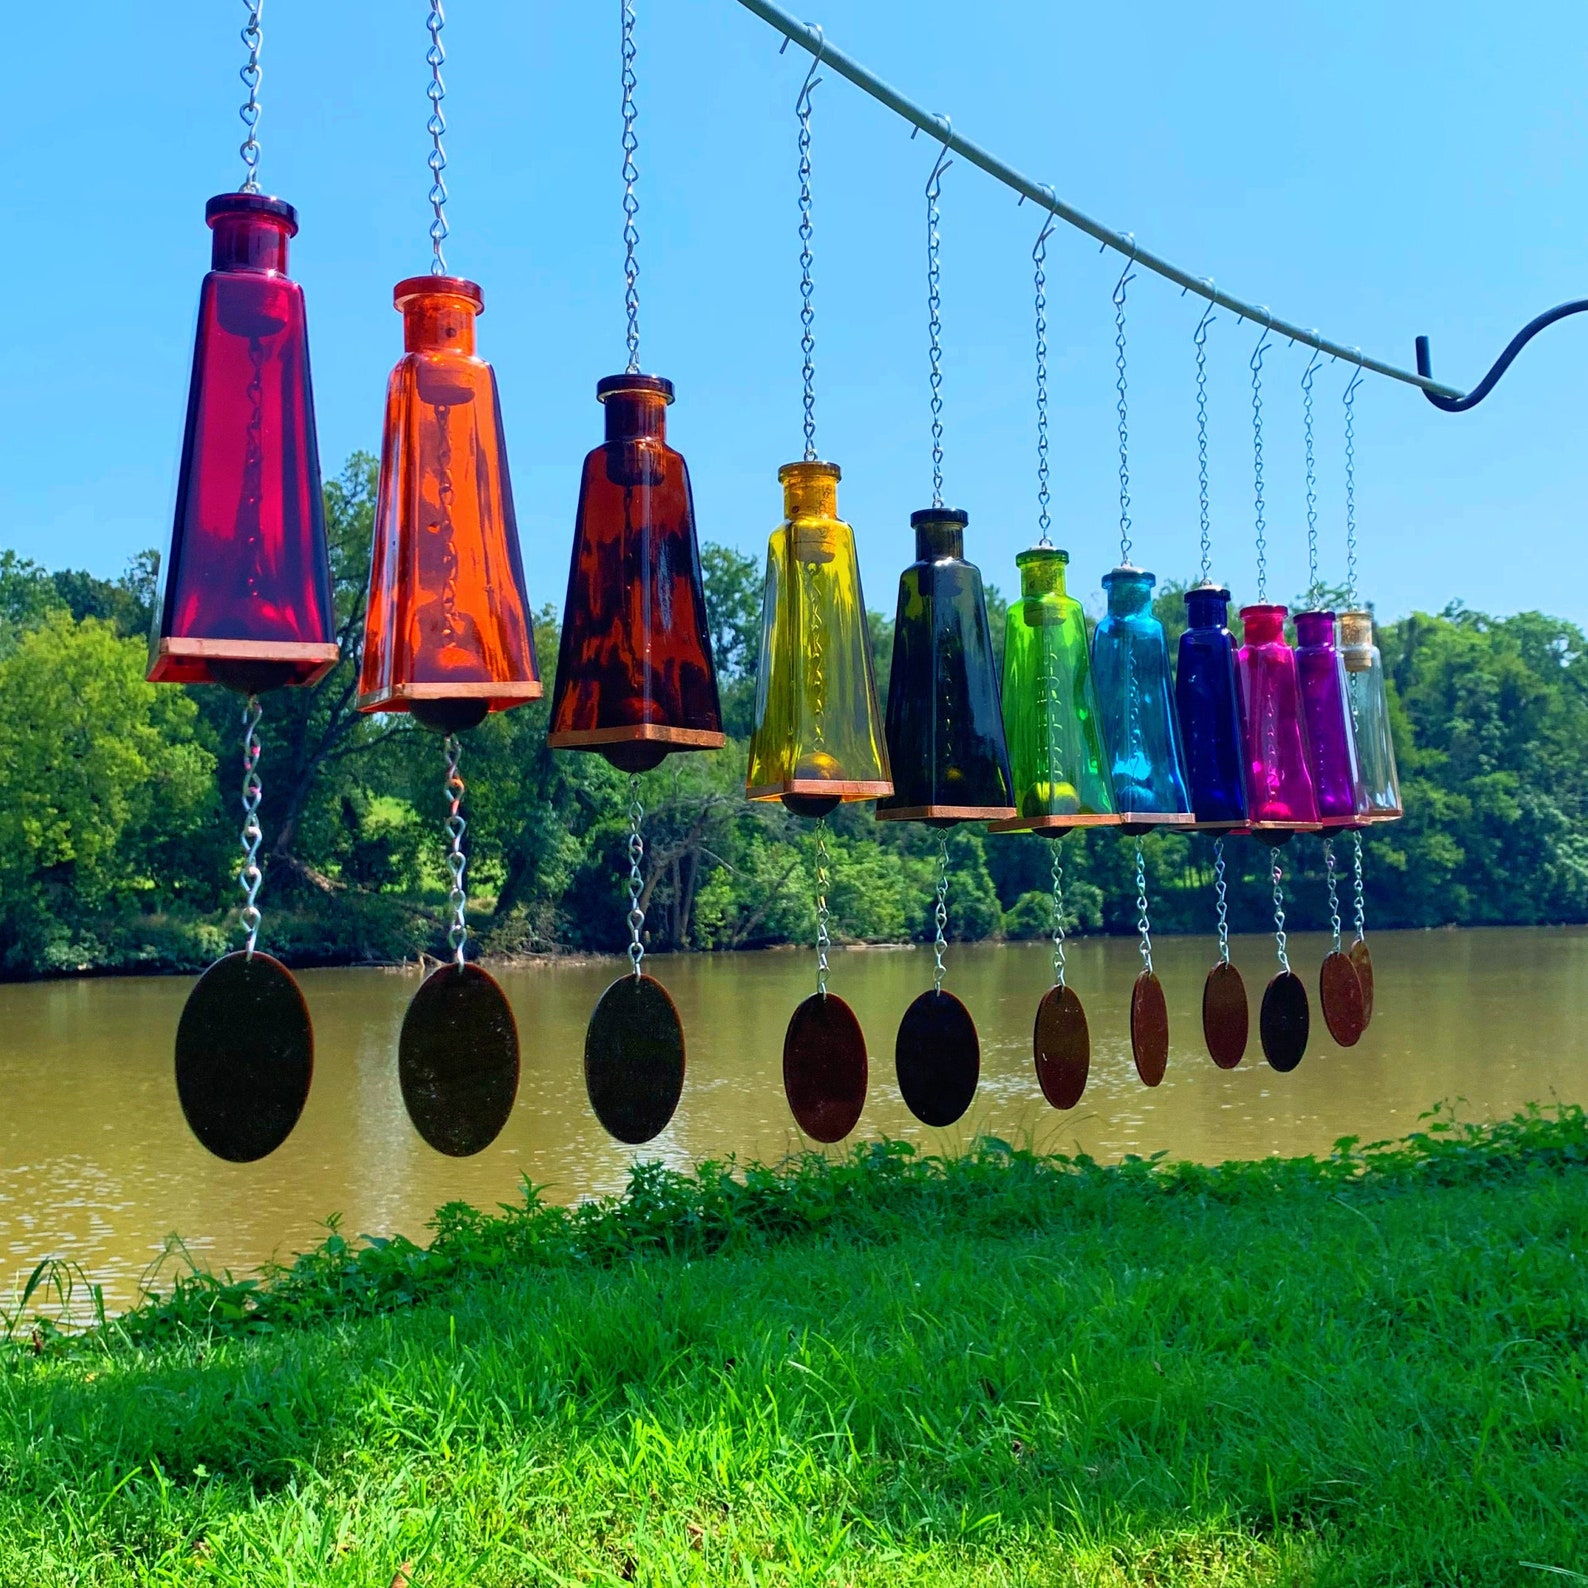 Glass Wind Chimes Made From Pyramid Shaped Bottles Hand Cut and Made Assorted Colors Outdoor Garden Patio Decor Unique